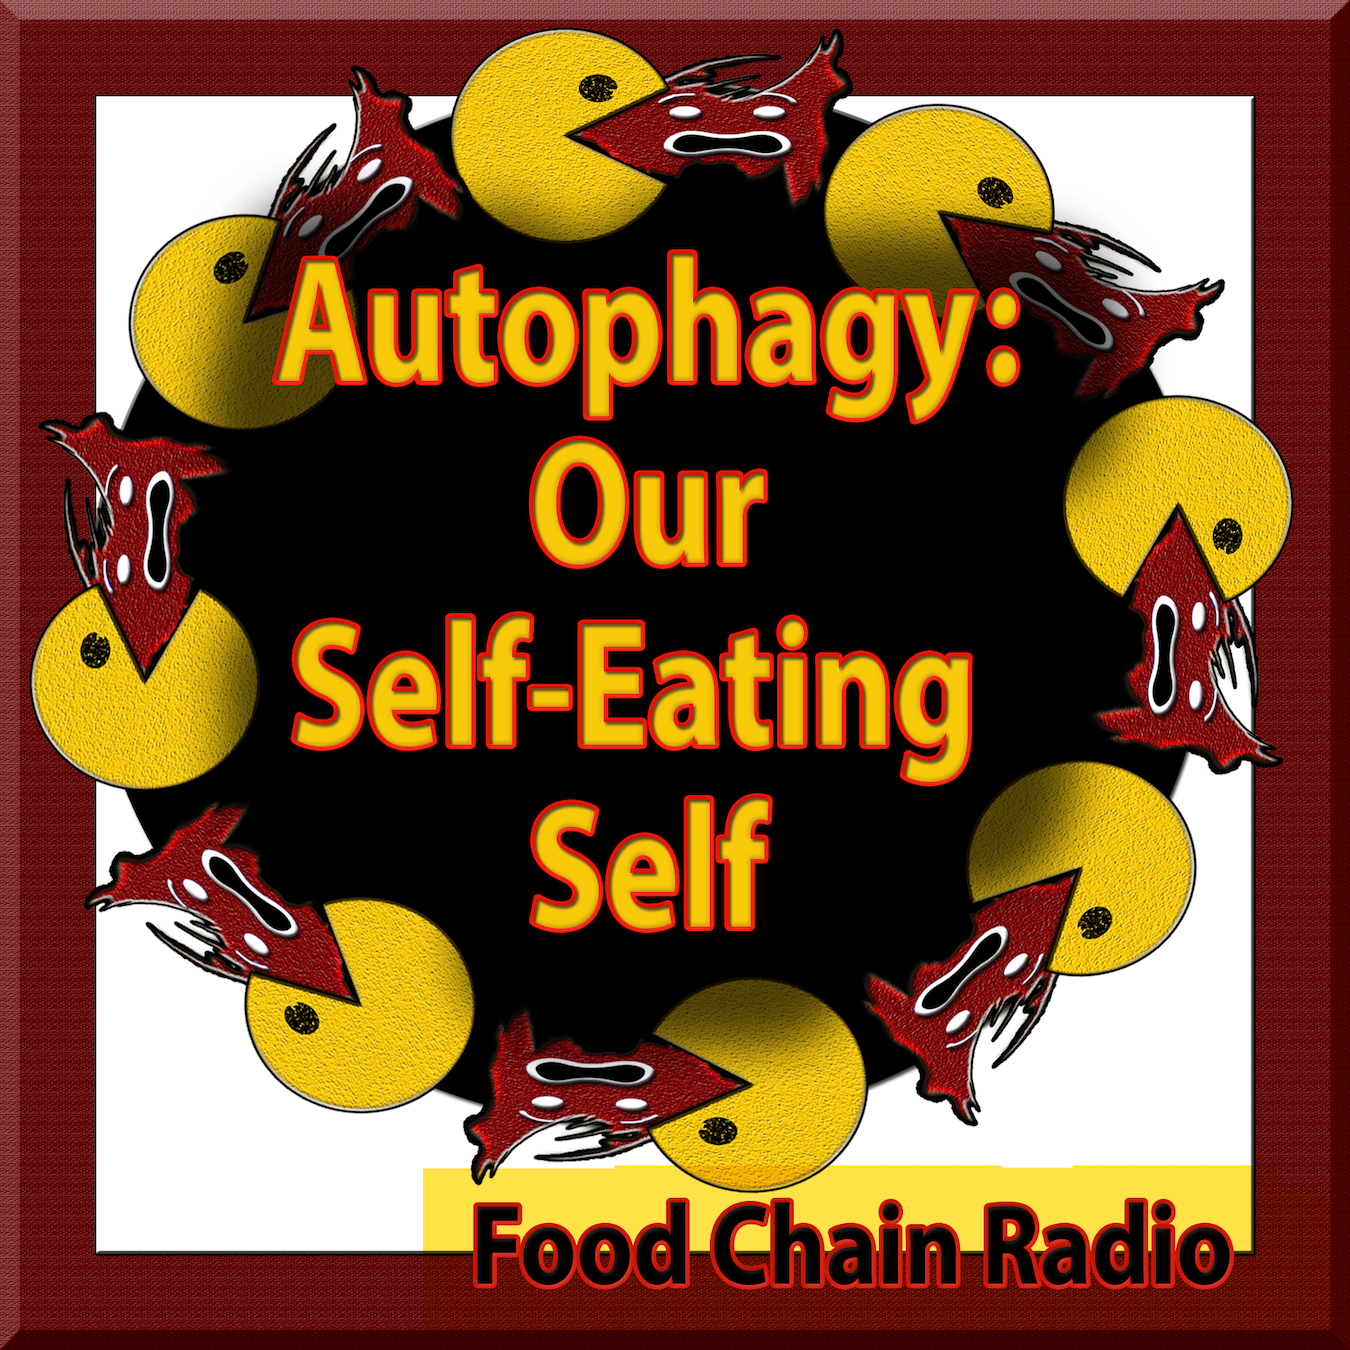 Michael Olson Food Chain Radio – Autophagy: Our Self-Eating Self! How does our body renew itself by eating itself?